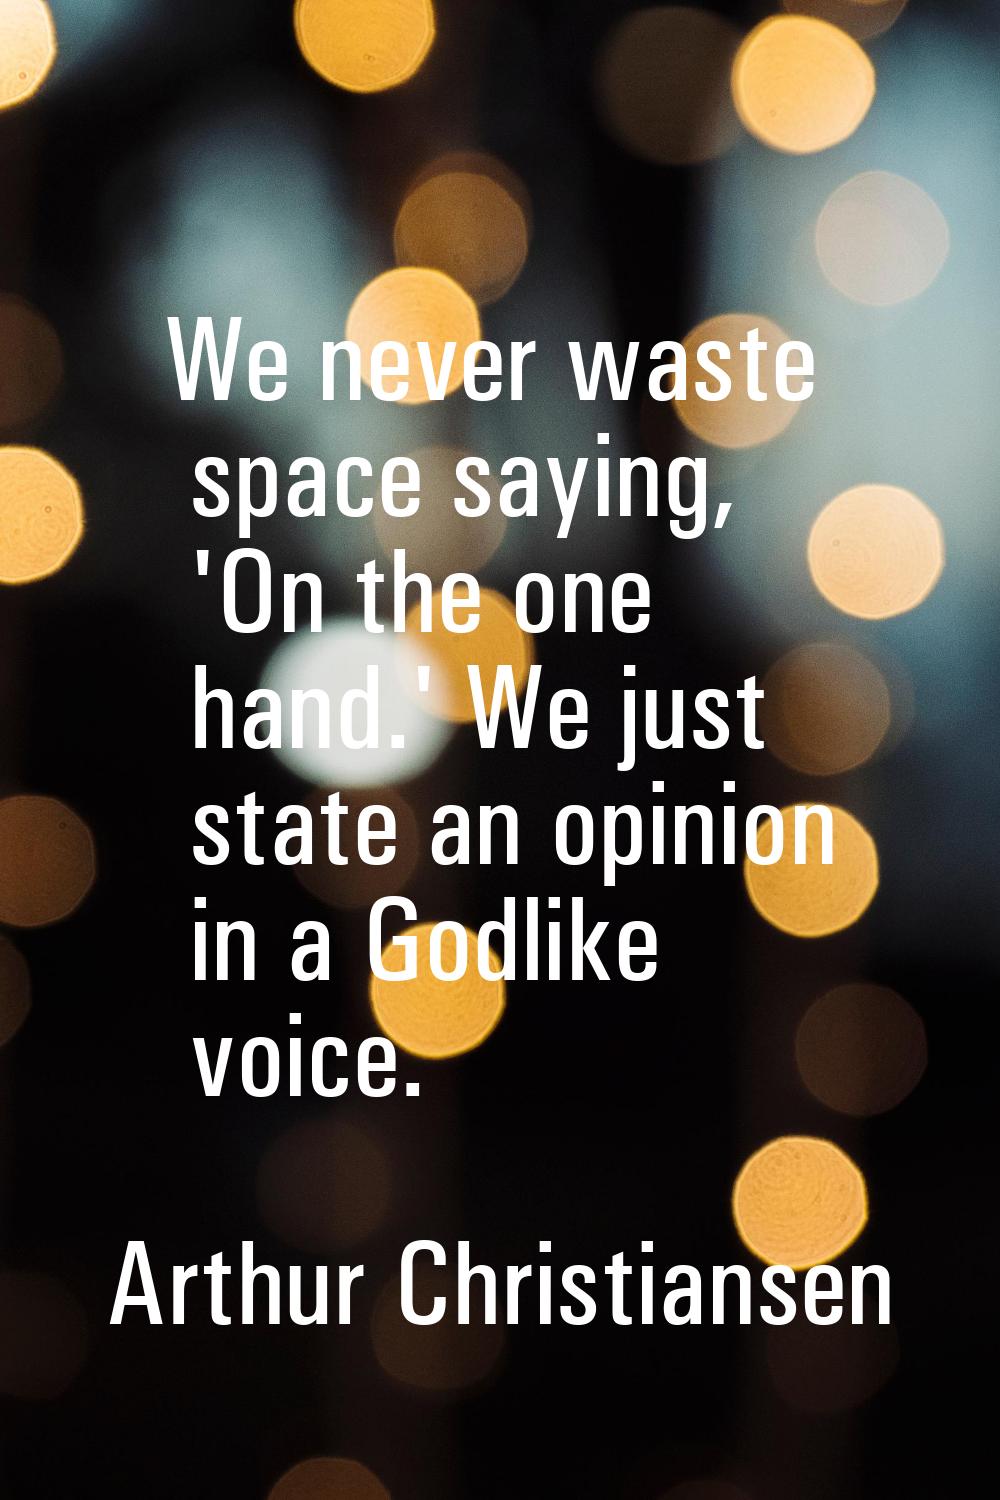 We never waste space saying, 'On the one hand.' We just state an opinion in a Godlike voice.